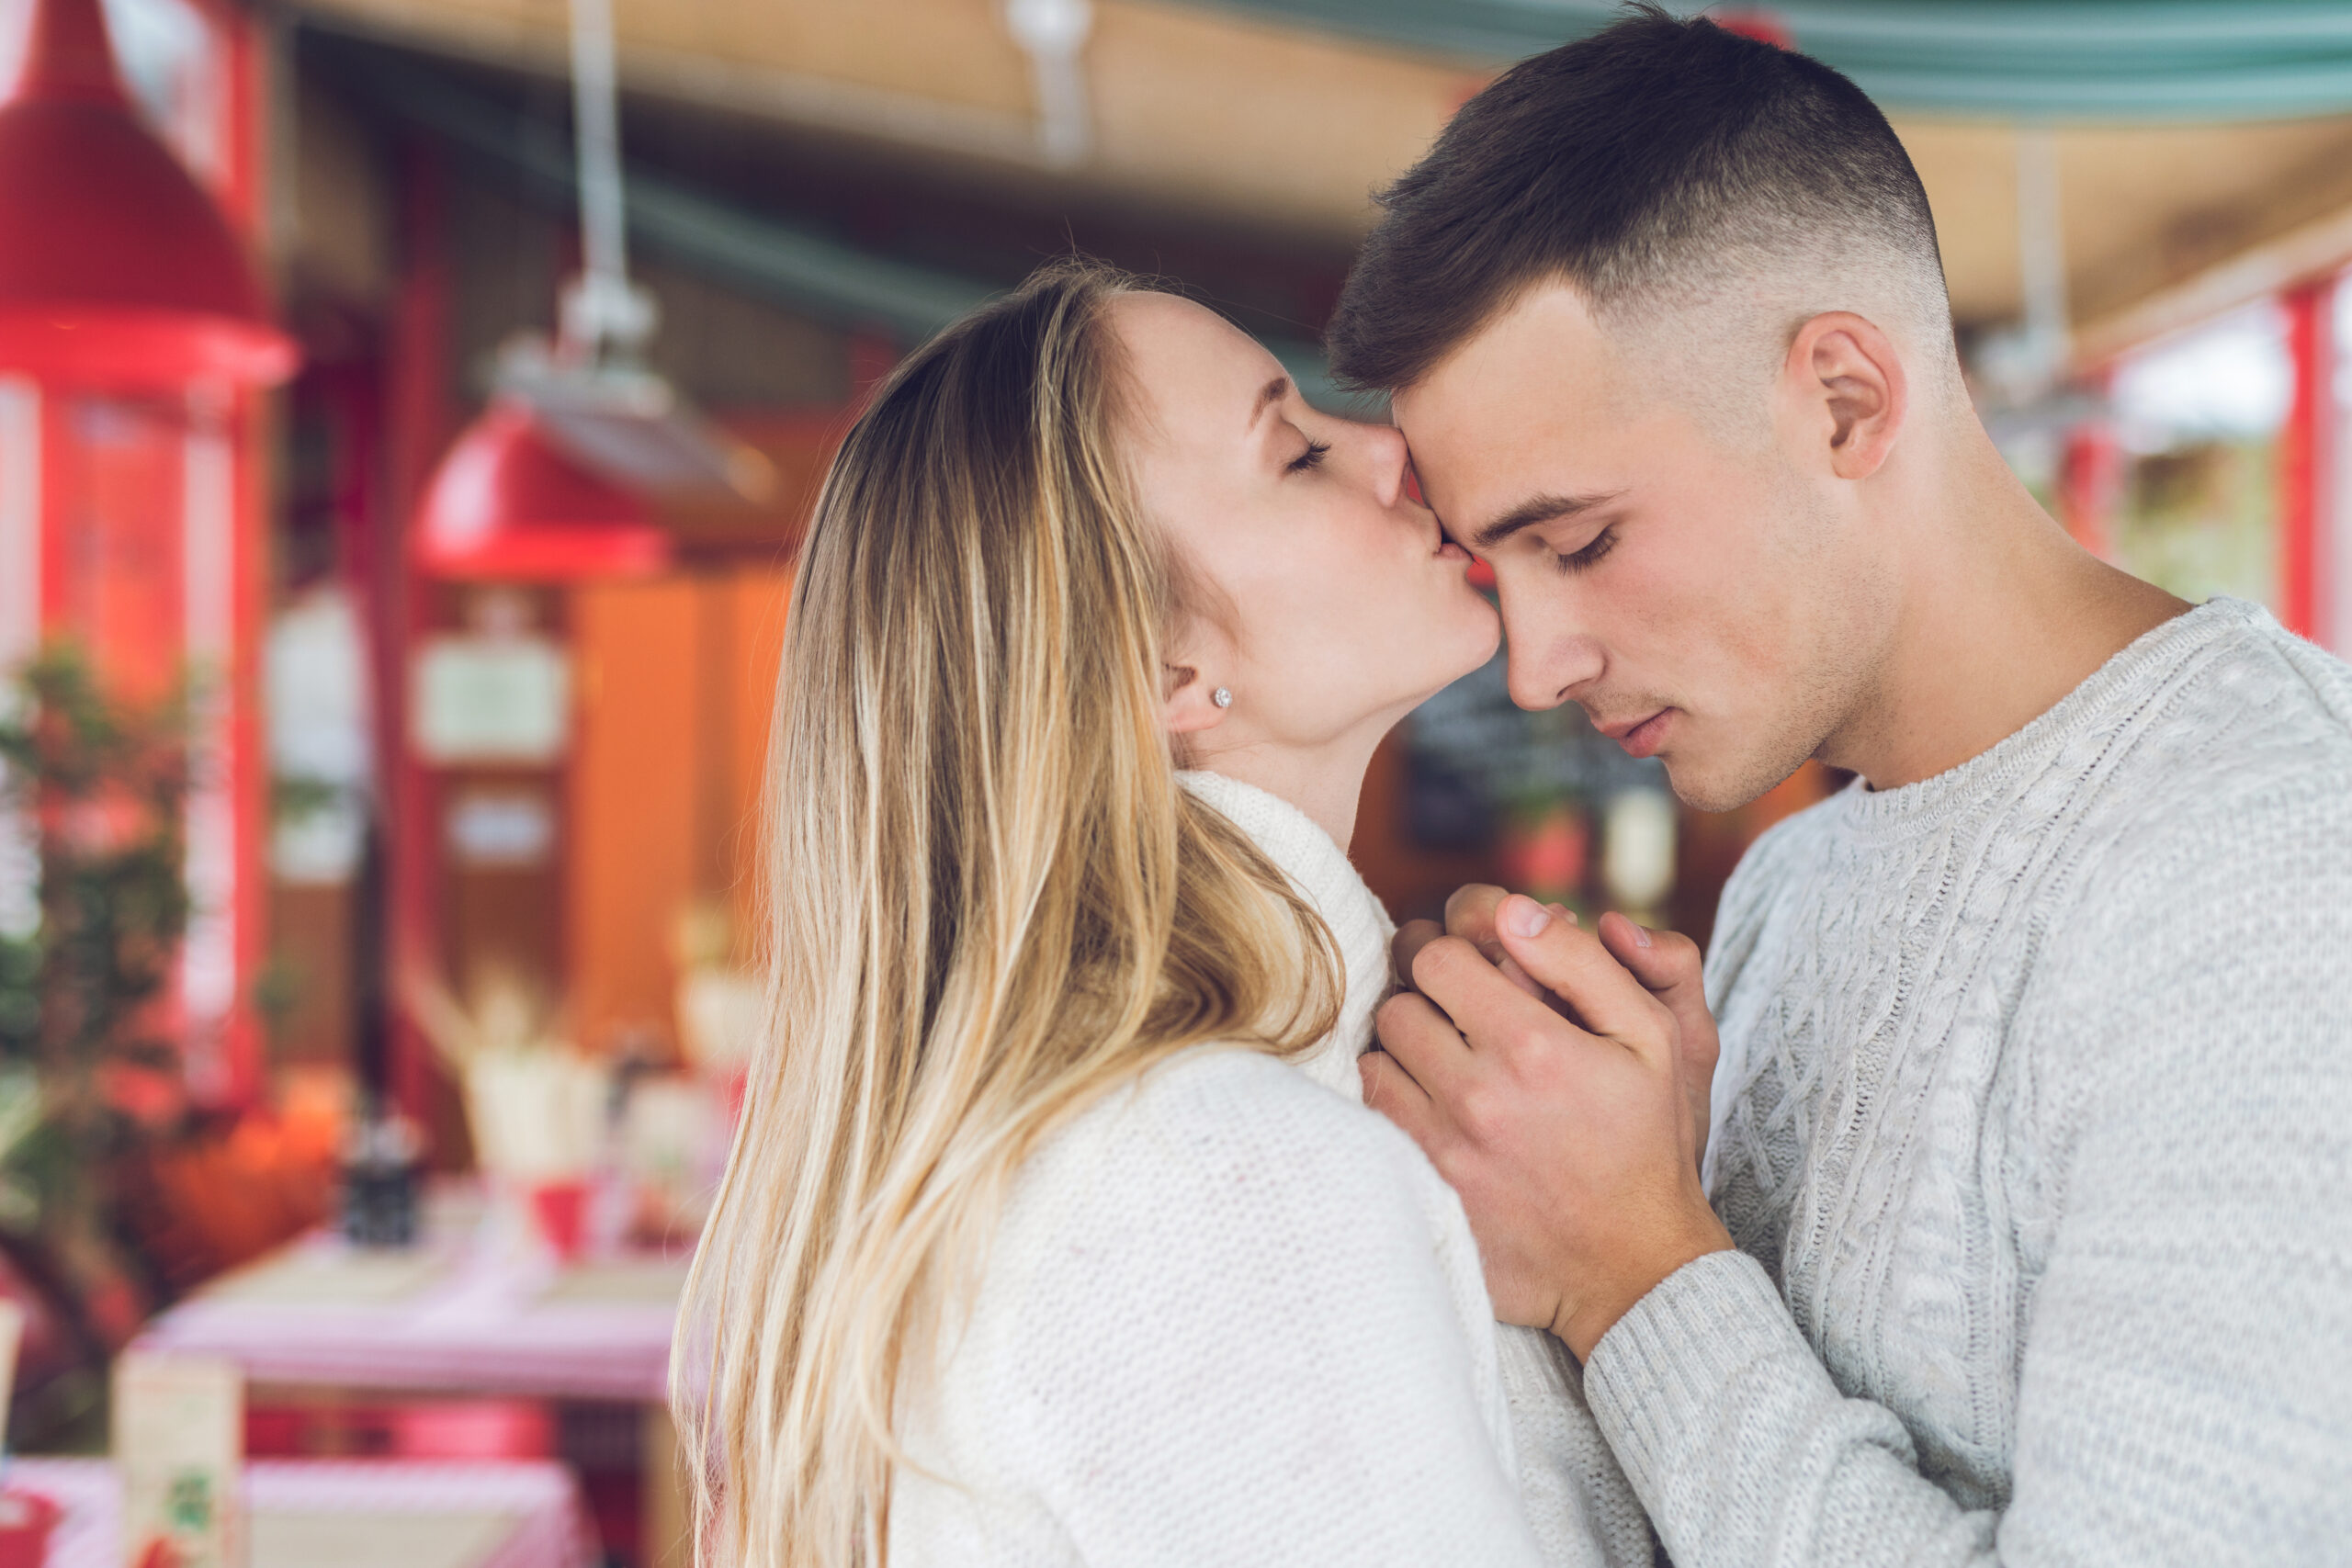 A woman kisses the forehead of her boyfriend inside a restaurant.